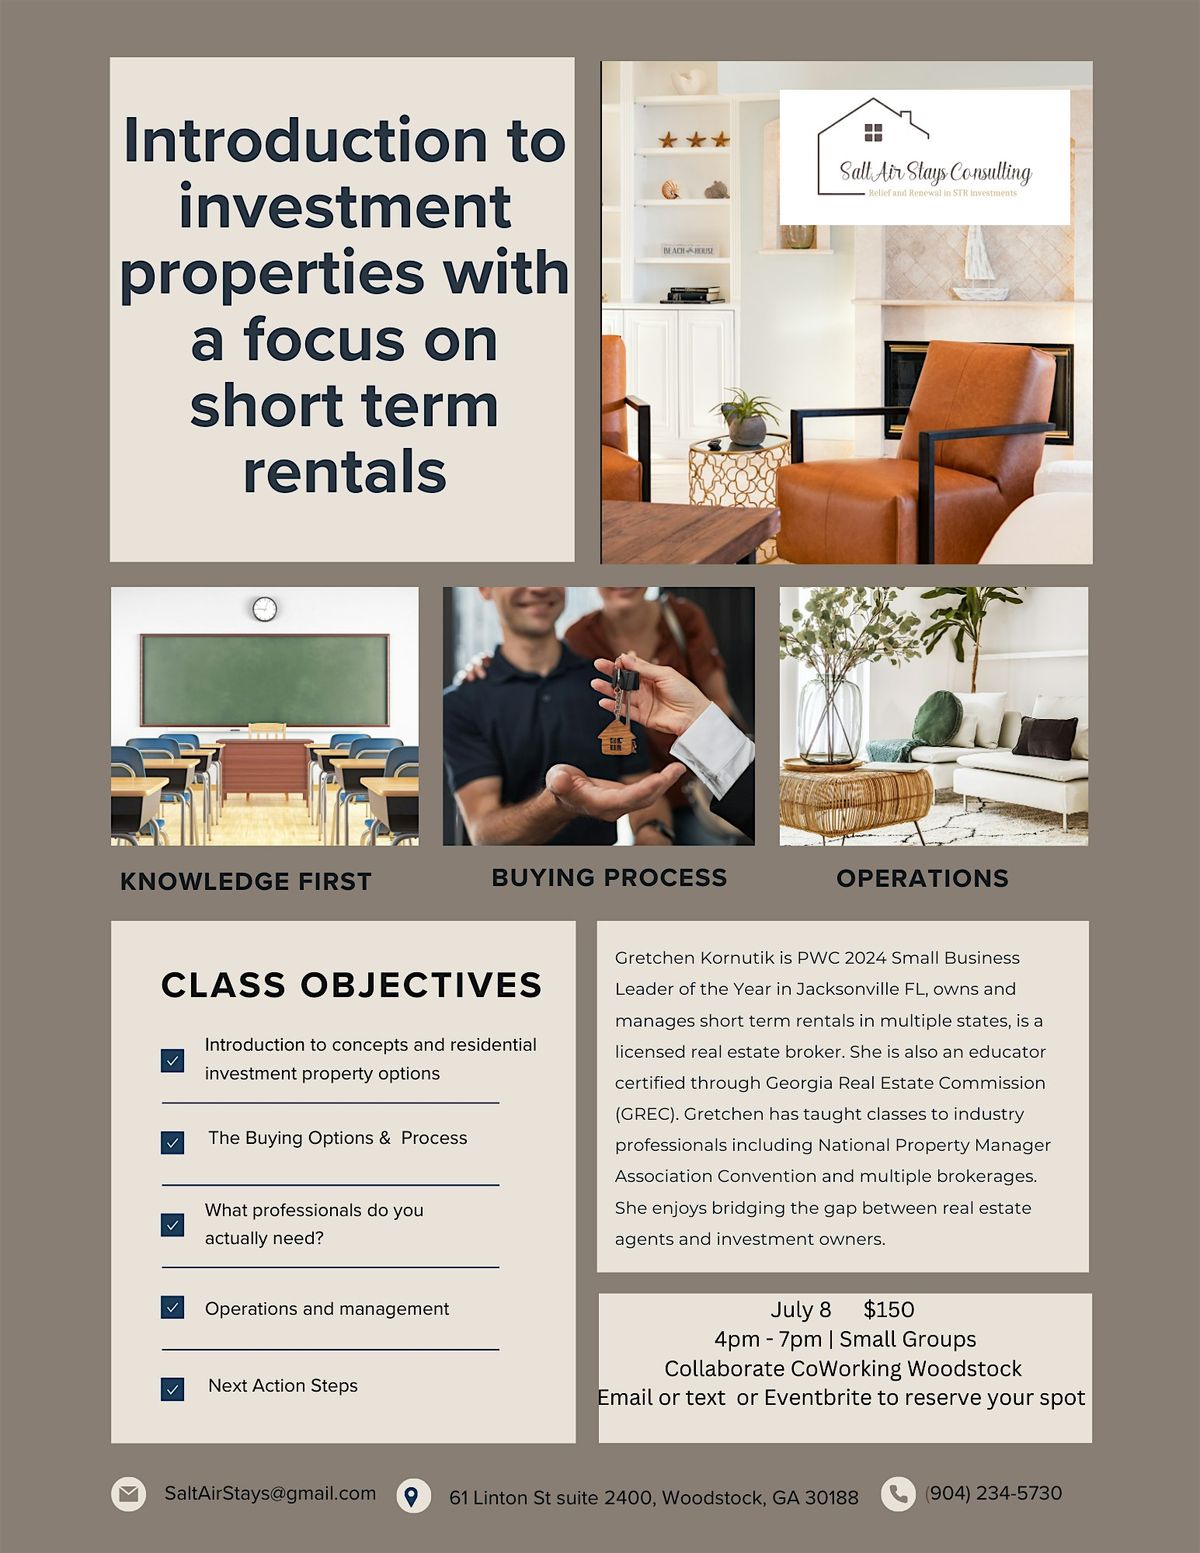 Introduction to investment properties with a focus on short term rentals